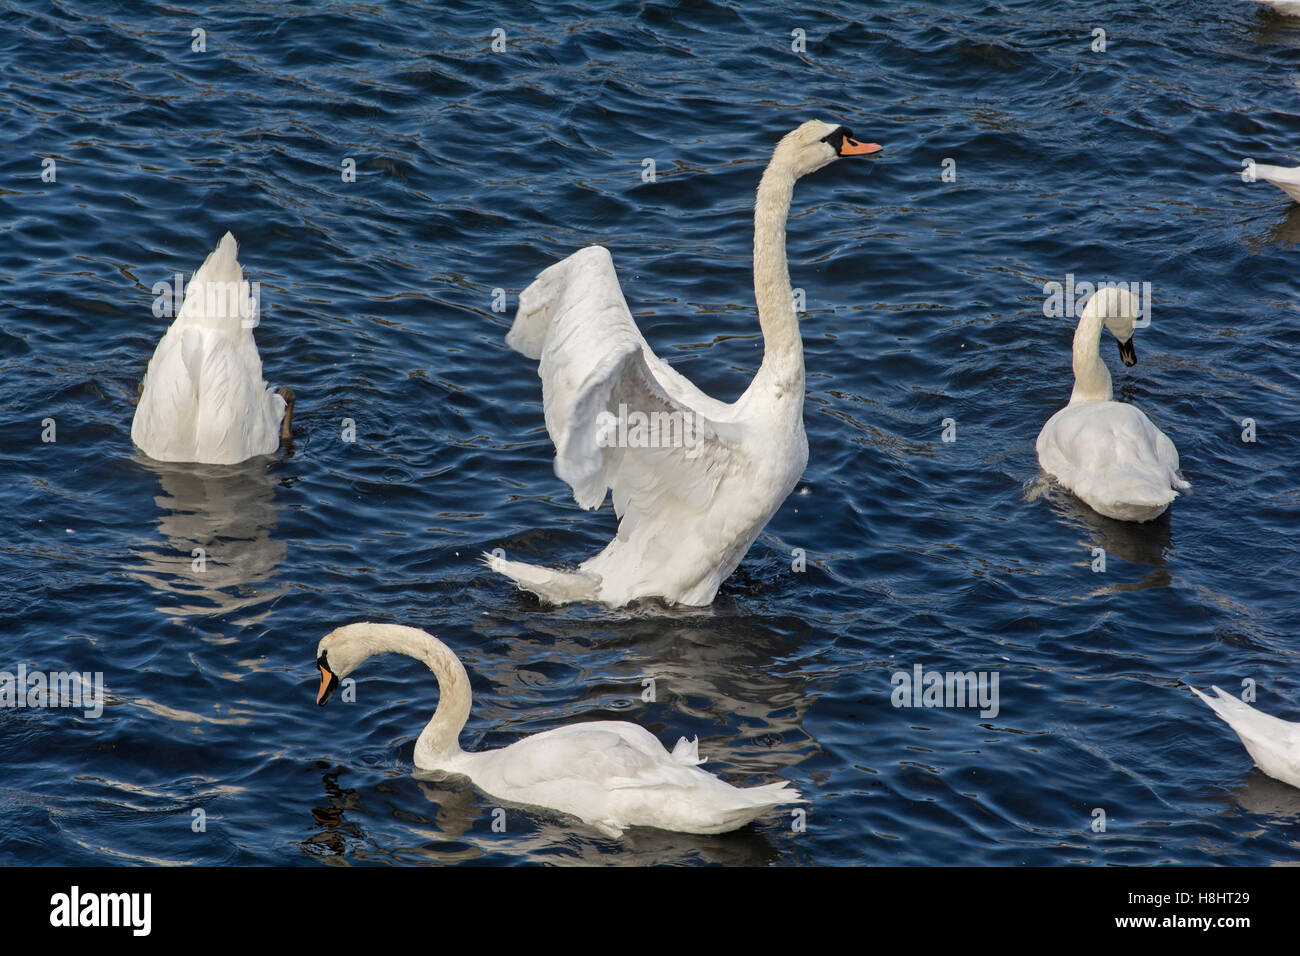 A flock of mute swans swimming peacefully, feeding on vegetation and flapping wings Stock Photo